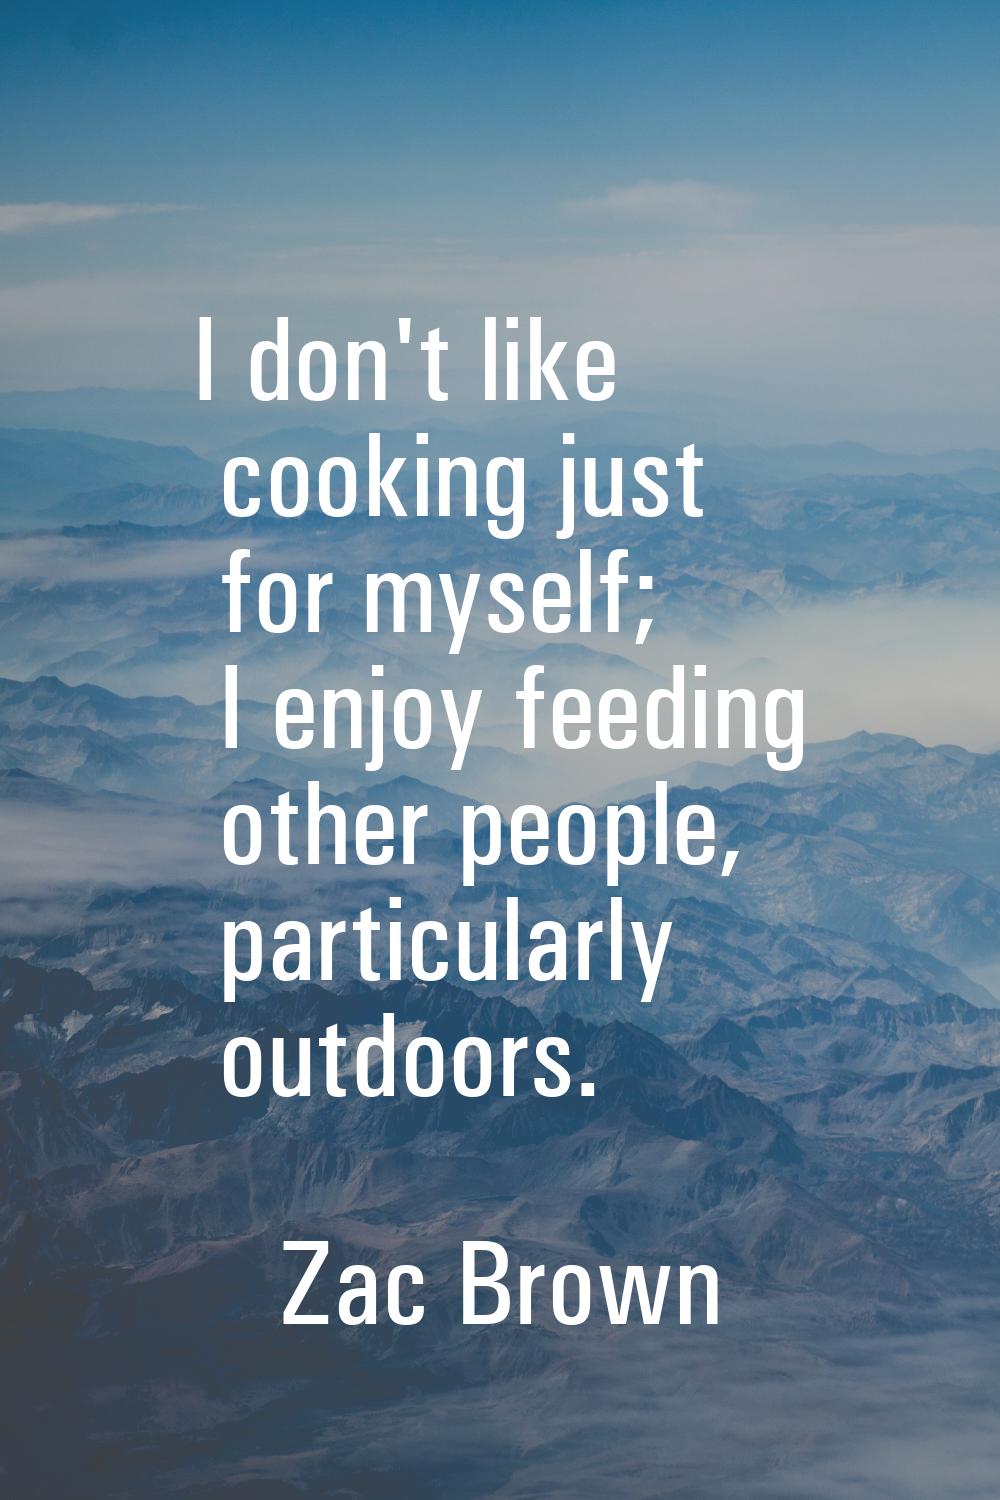 I don't like cooking just for myself; I enjoy feeding other people, particularly outdoors.